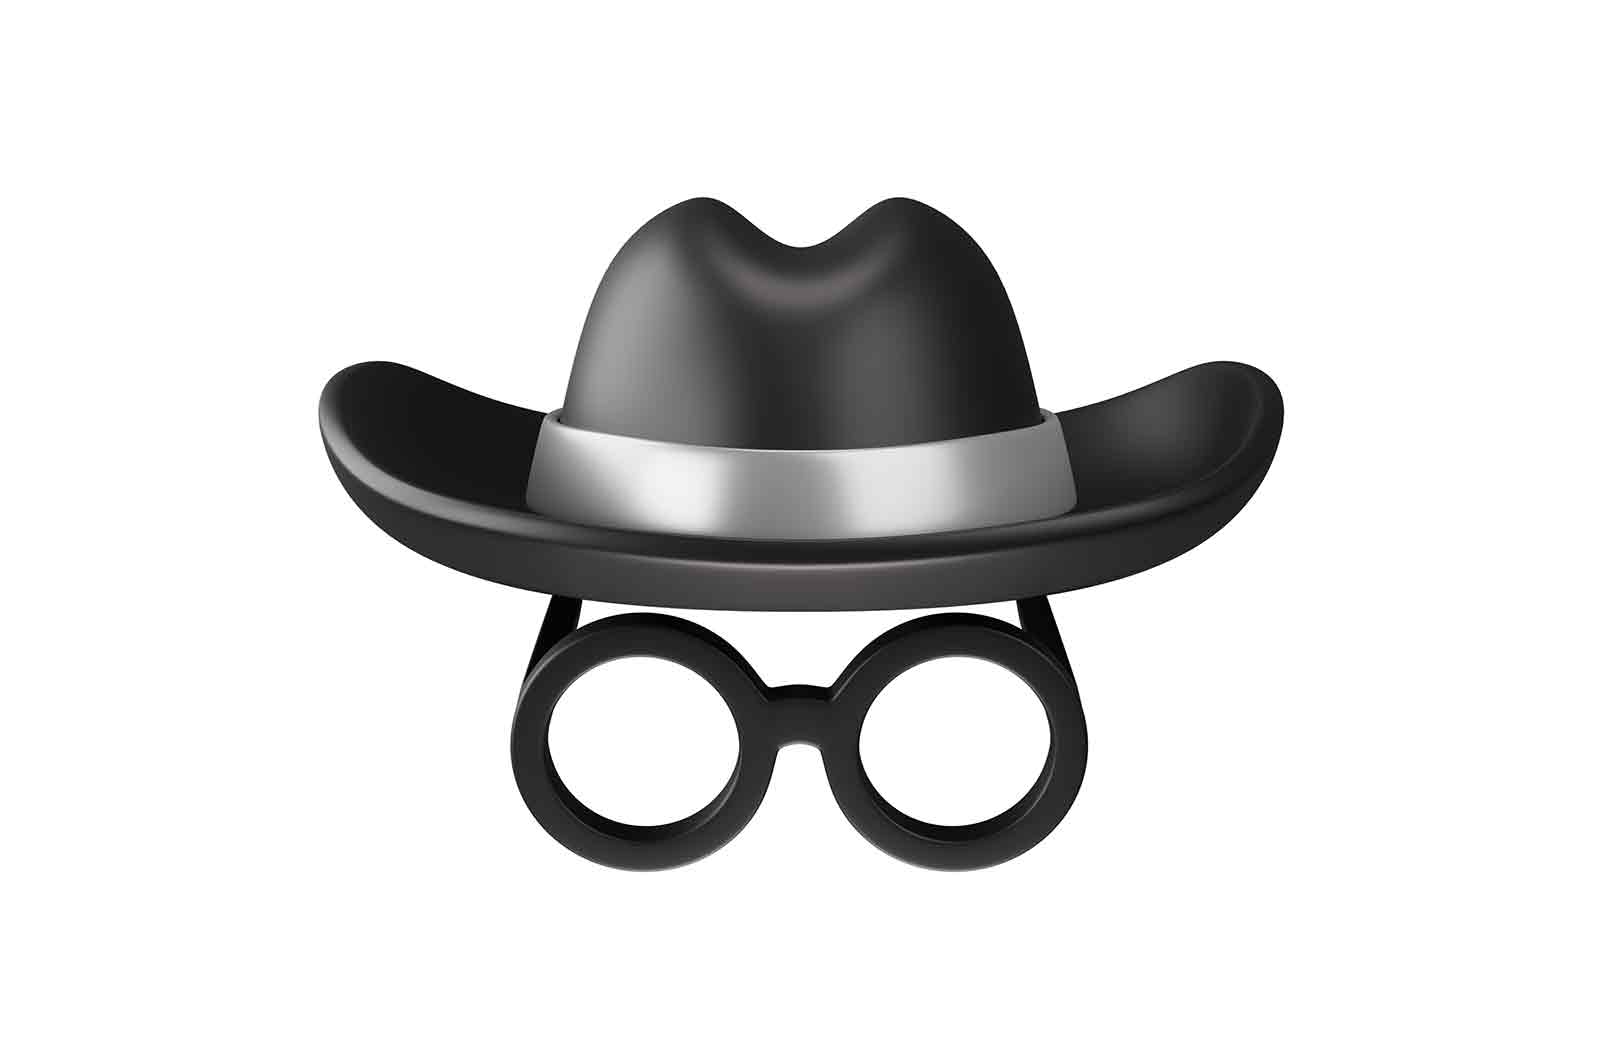 Black hat and eyeglasses icon, anonymous, spy person or detective face 3d rendered illustration. Incognita 3d isometric. Incognito mode, vpn. Virtual private network